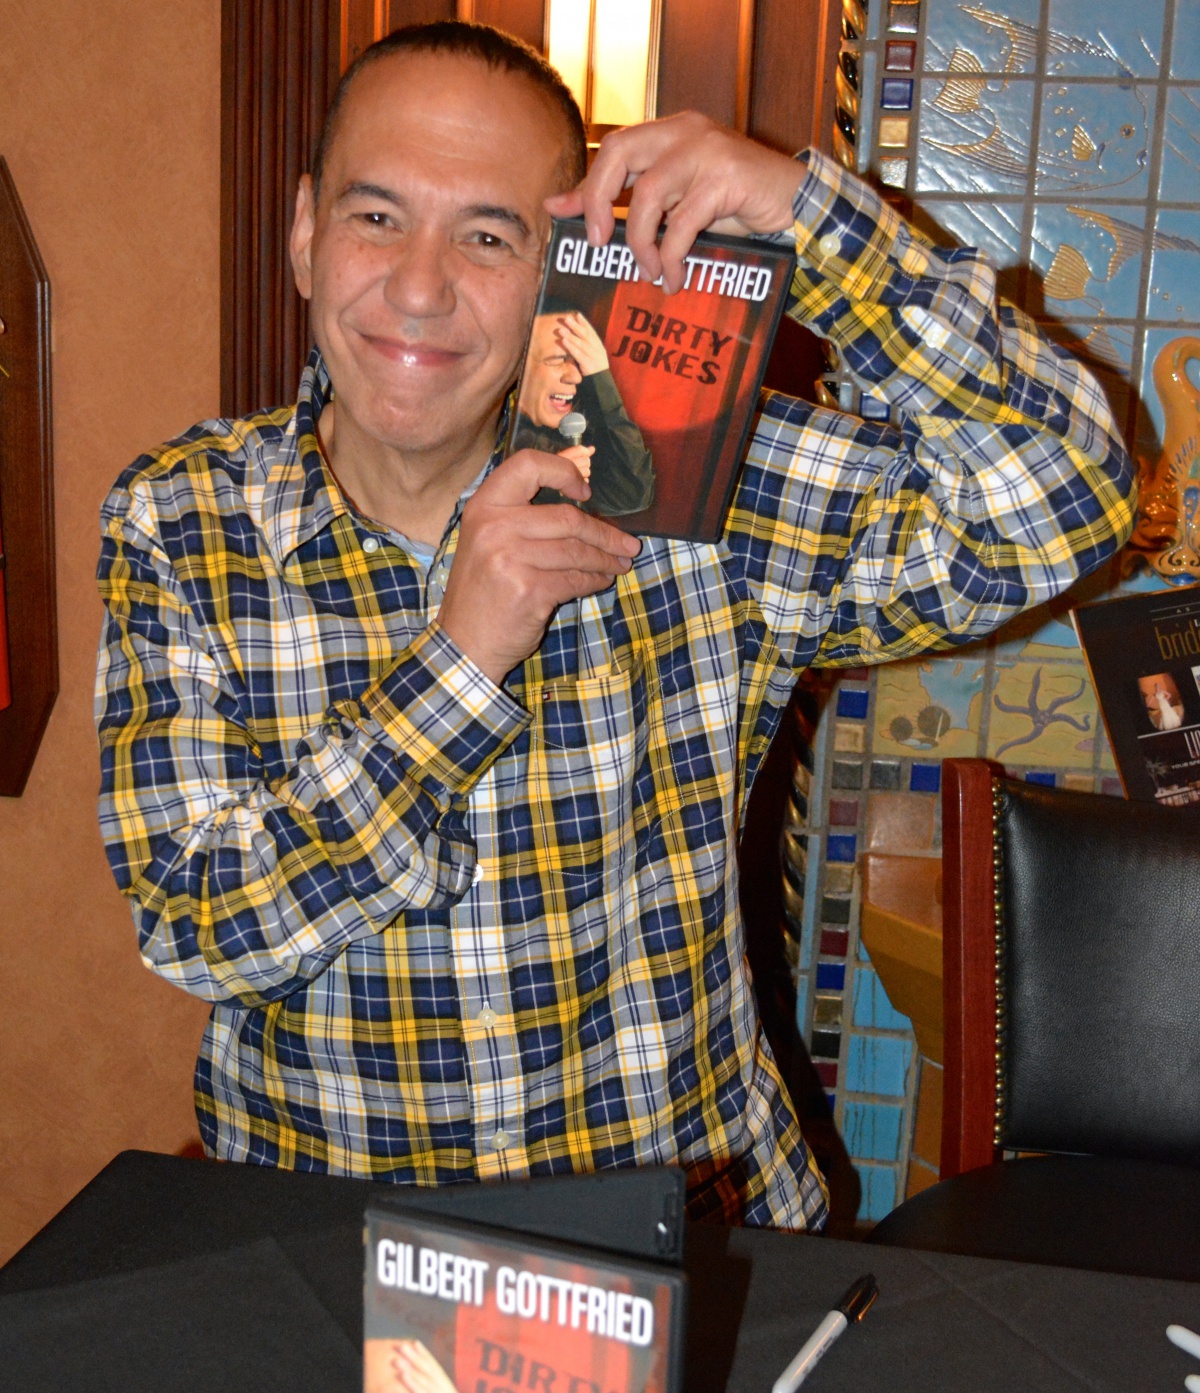 Gilbert Gottfried signing books and DVDs at Suffolk Theater.